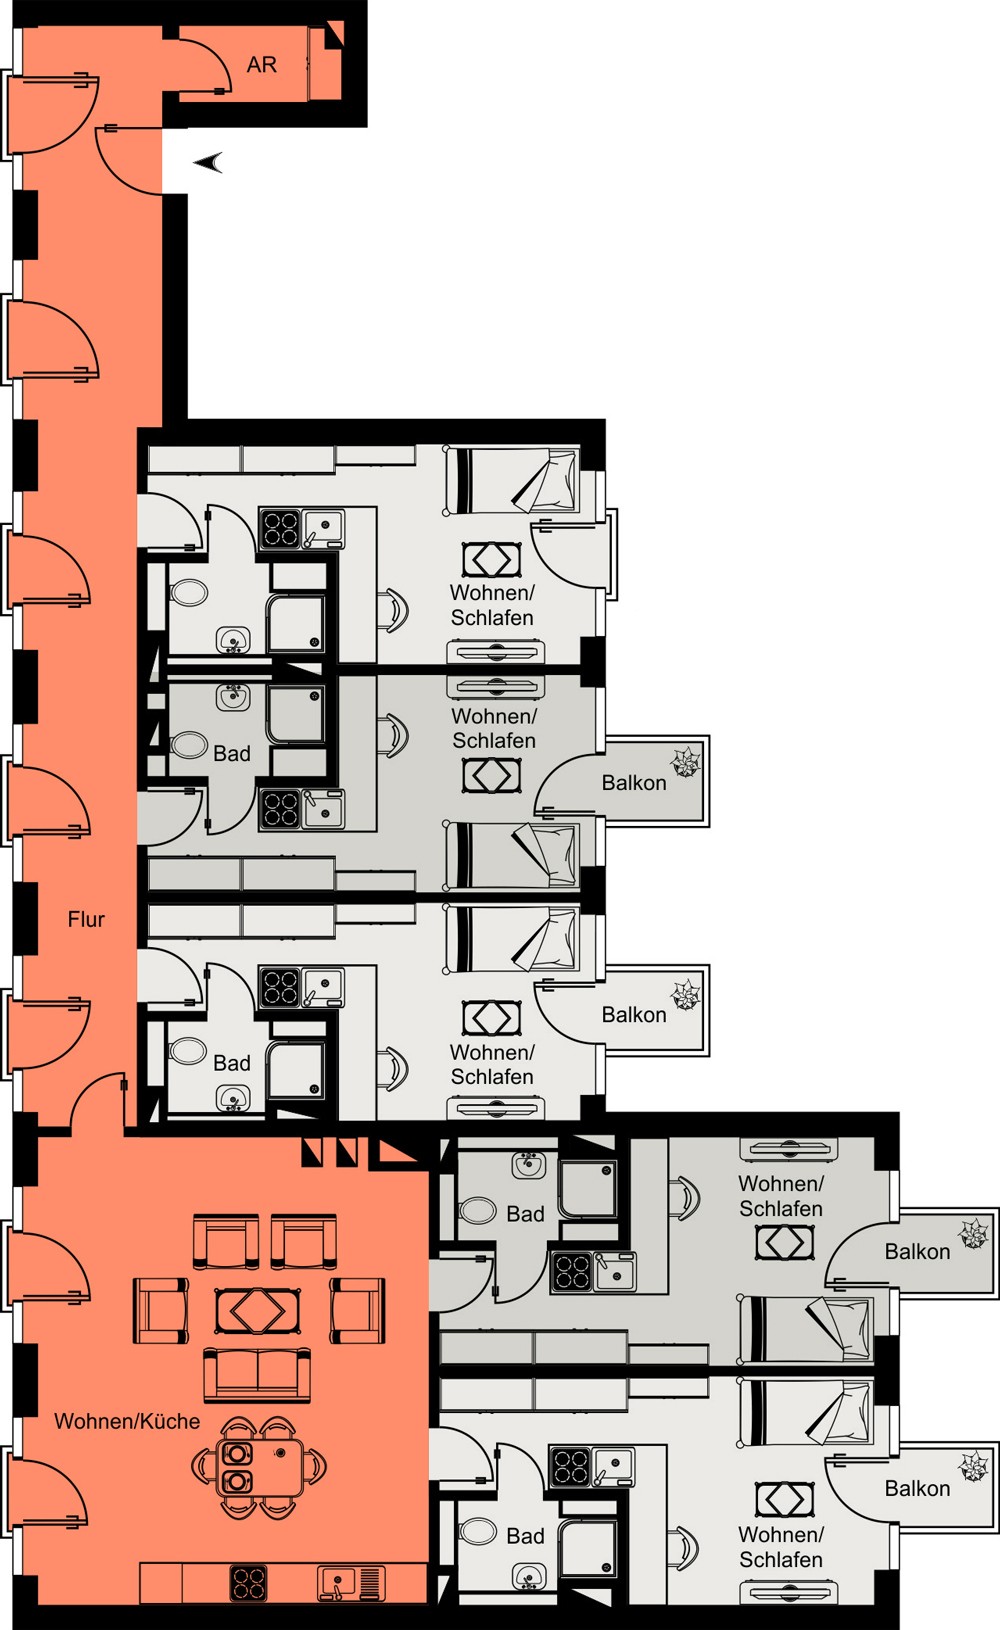 Example floor plan of an apartment